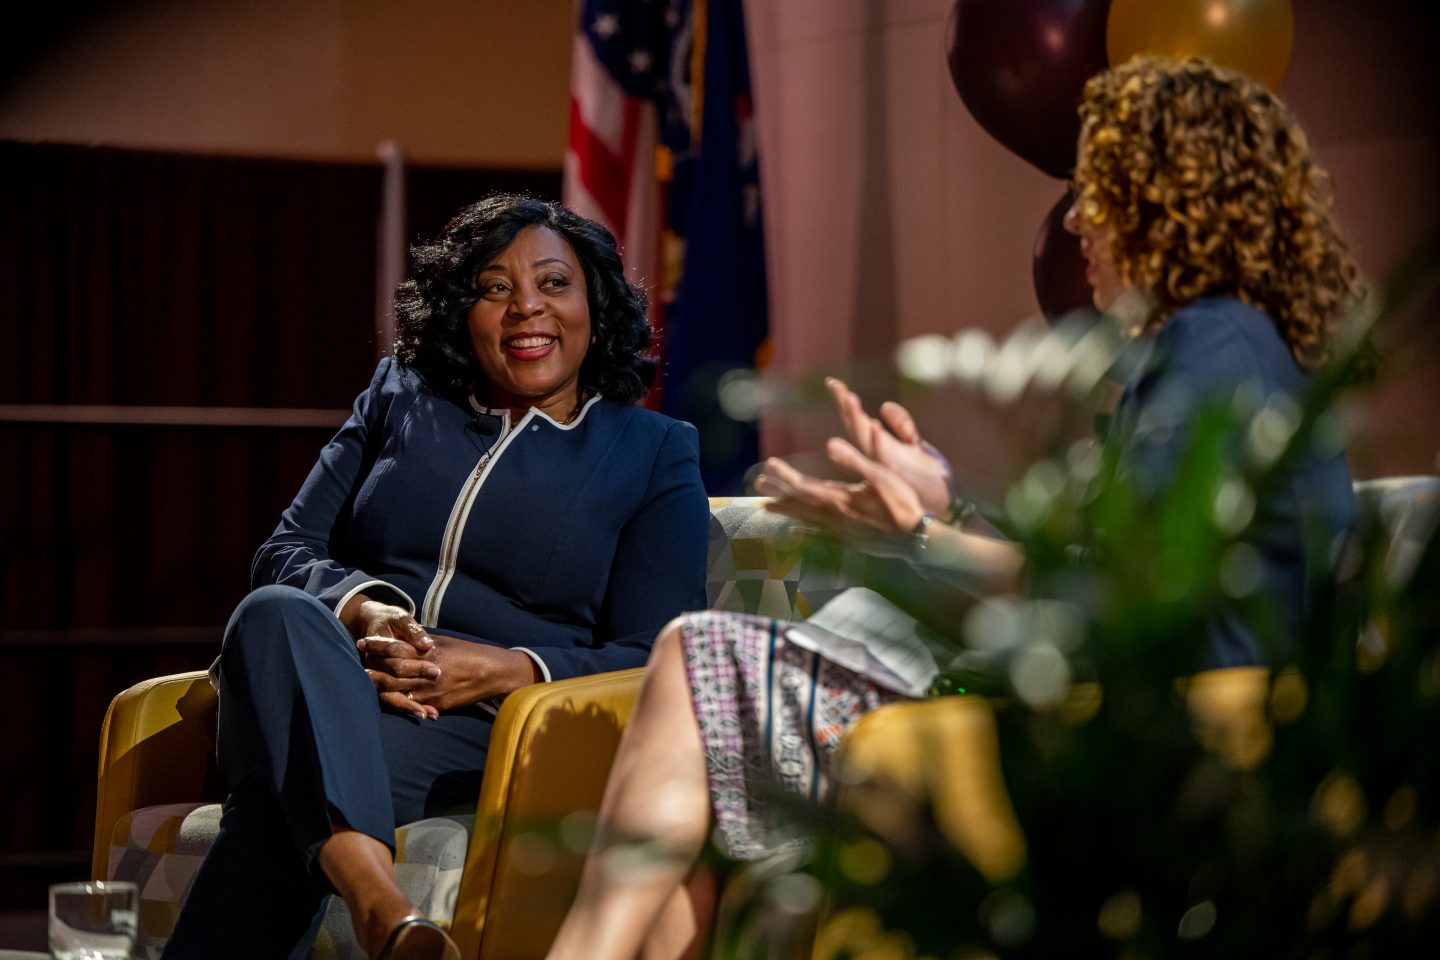 A smiling Francine Conway, the 2023 Scholarship and Creative Works Conference keynote speaker, a Black woman, is seated on a University Center stage being interviewed by a white woman—discussing her role in establishing that annual event two decades ago.